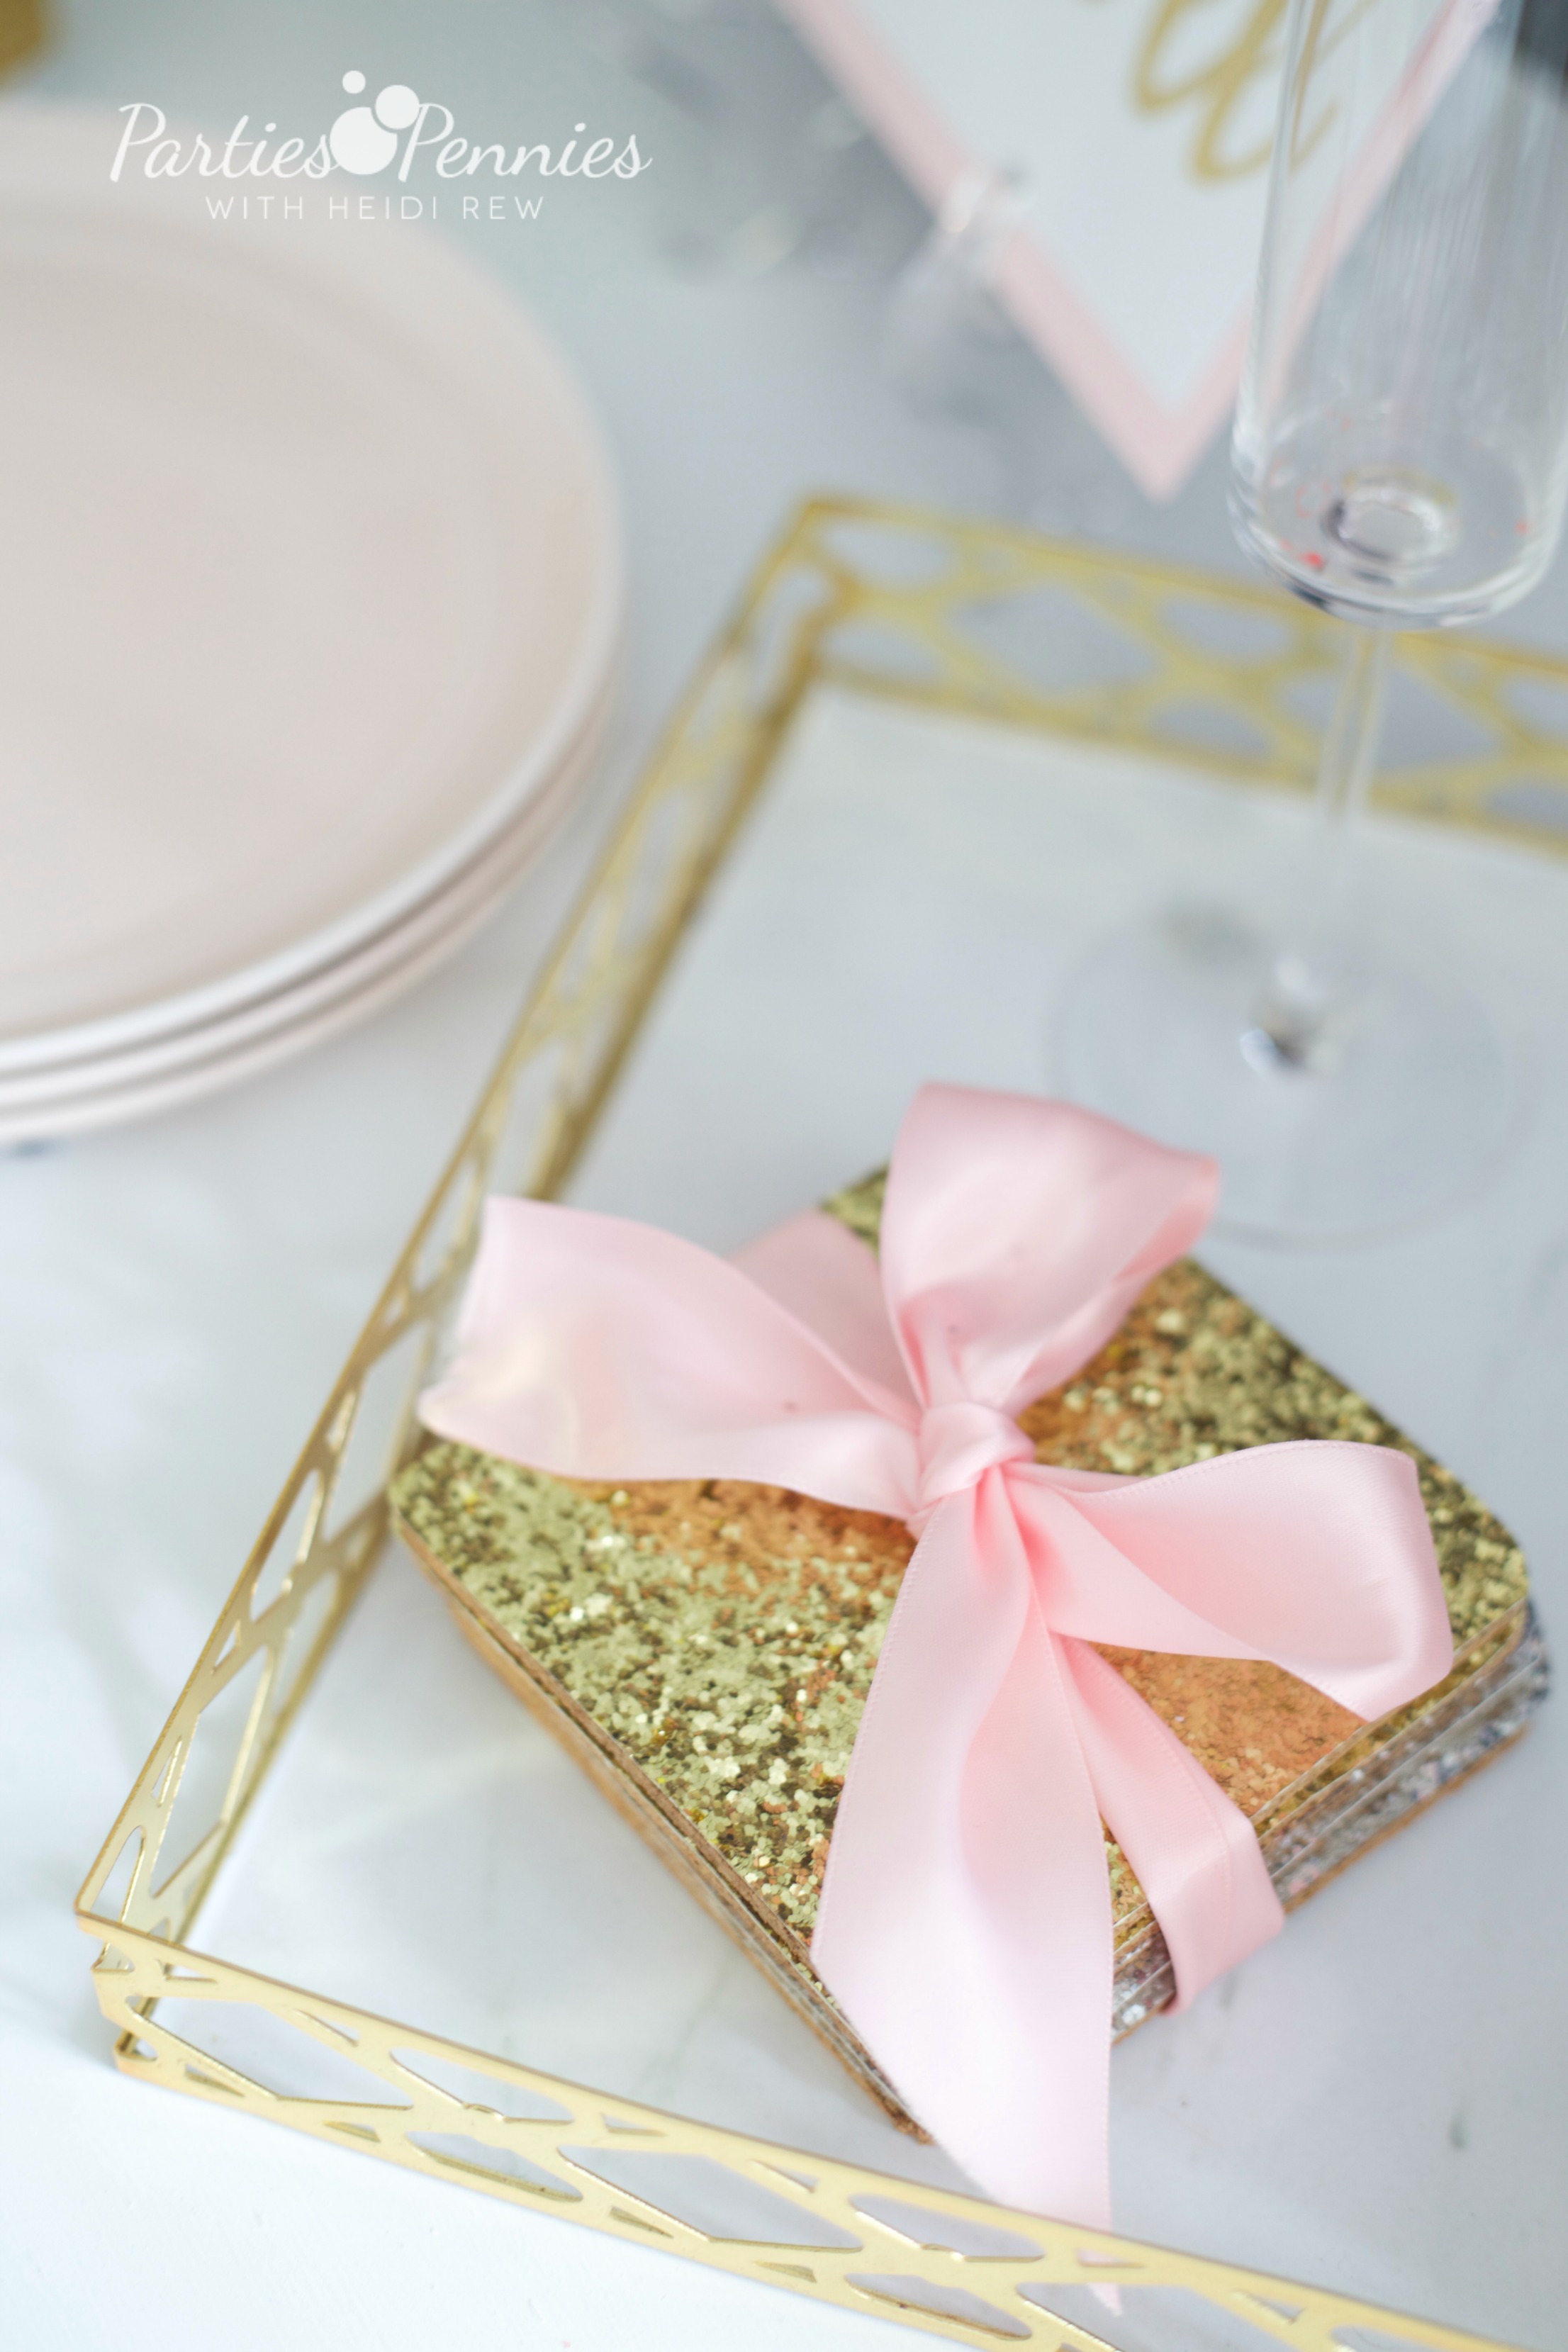 6 Budget-Friendly New Year's Eve Party Ideas by PartiesforPennies.com | DIY Glitter Coasters | NYE, Navy and Pink,